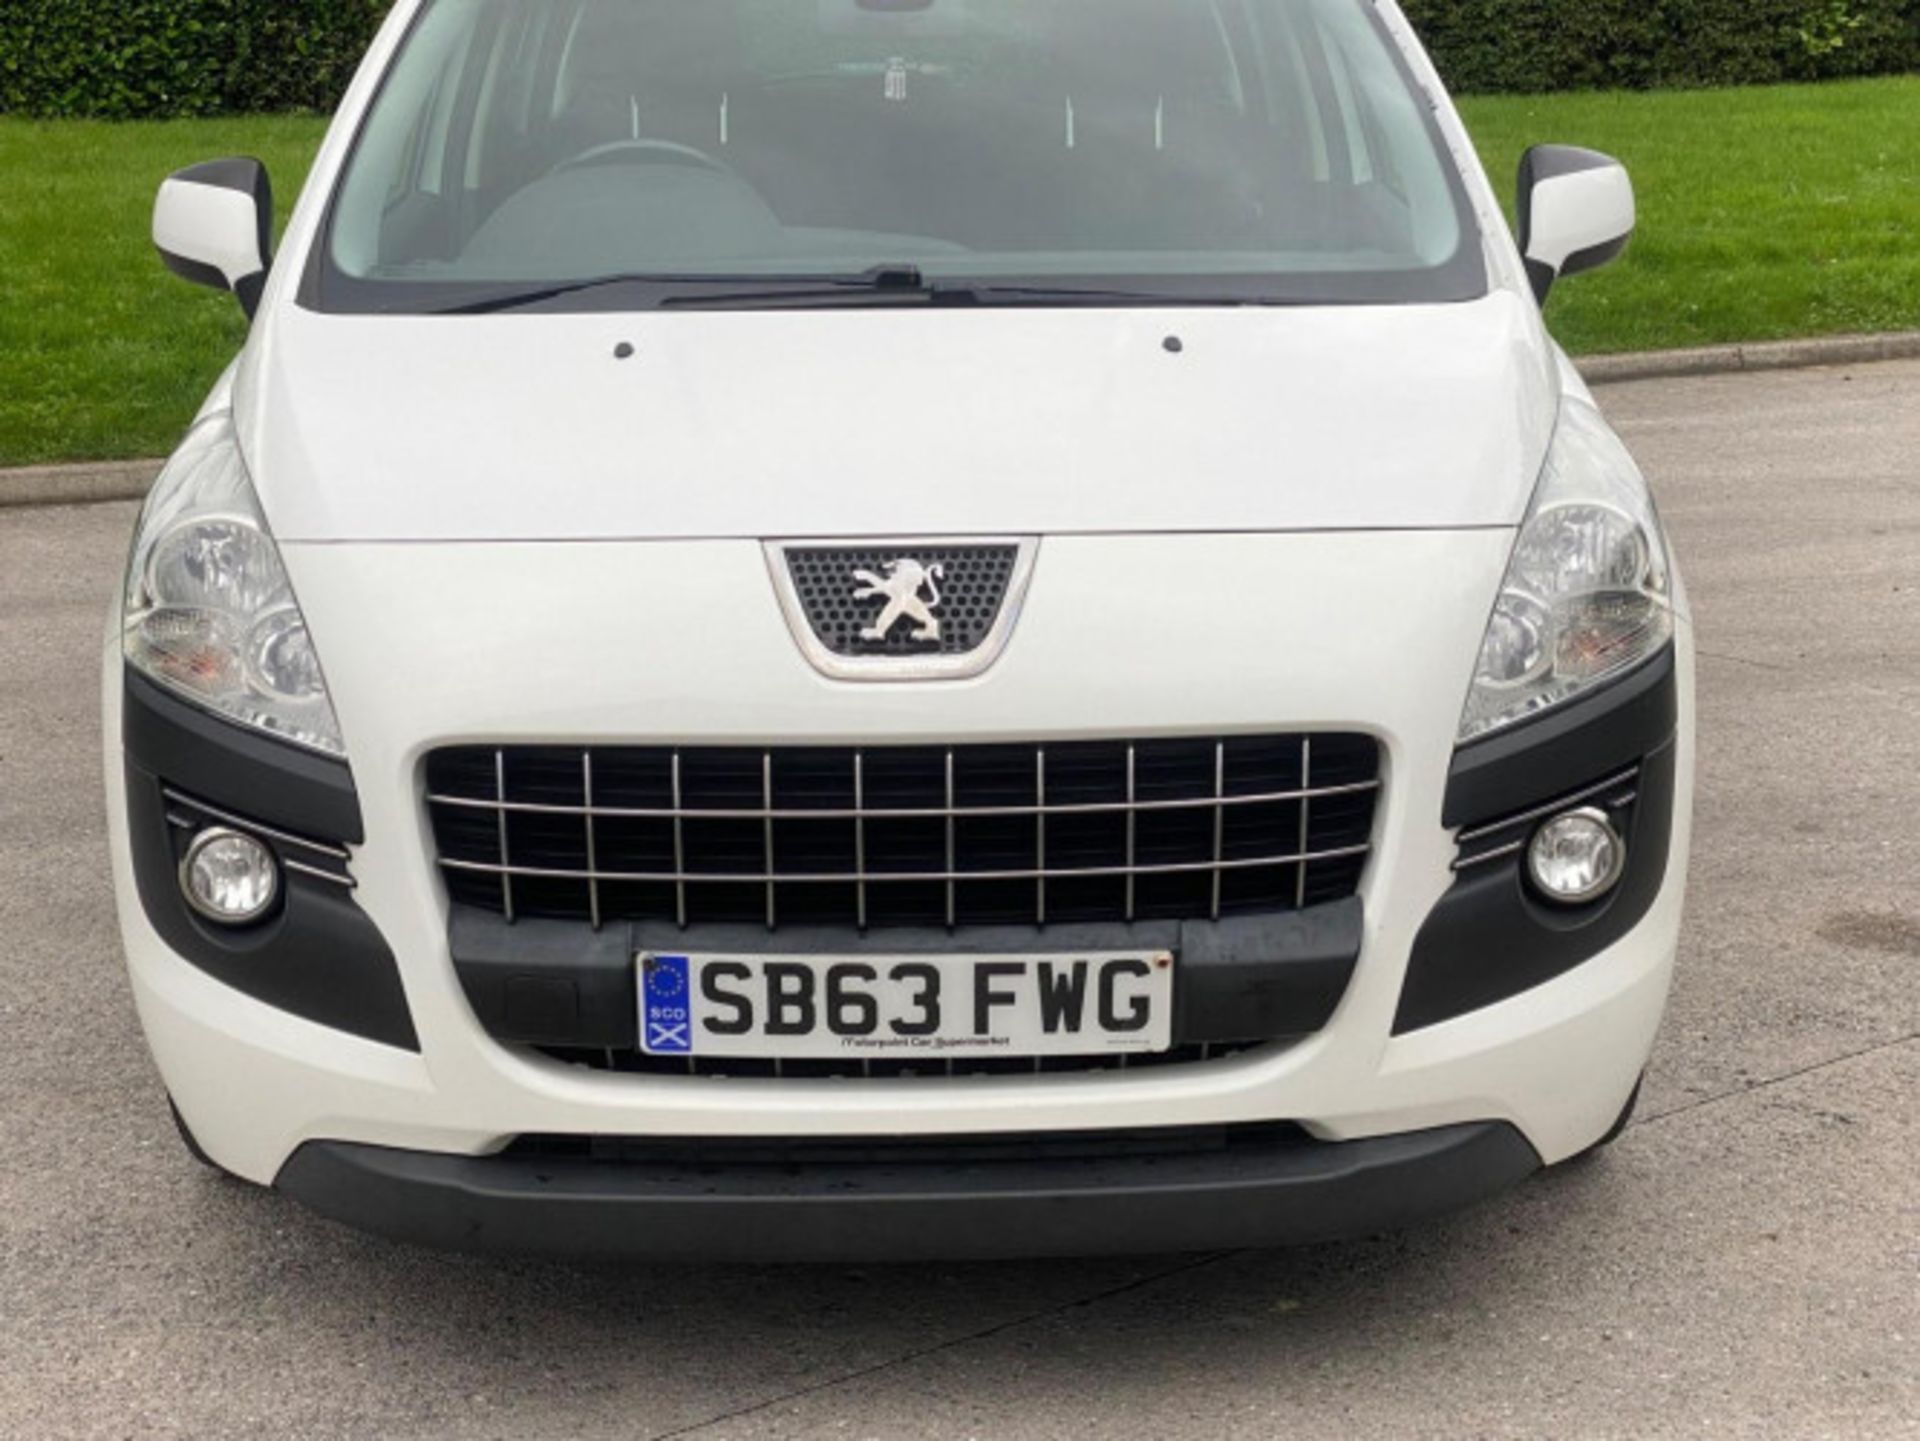 2013 PEUGEOT 3008 1.6 HDI ACTIVE EURO 5 5DR >>--NO VAT ON HAMMER--<< - Image 67 of 69